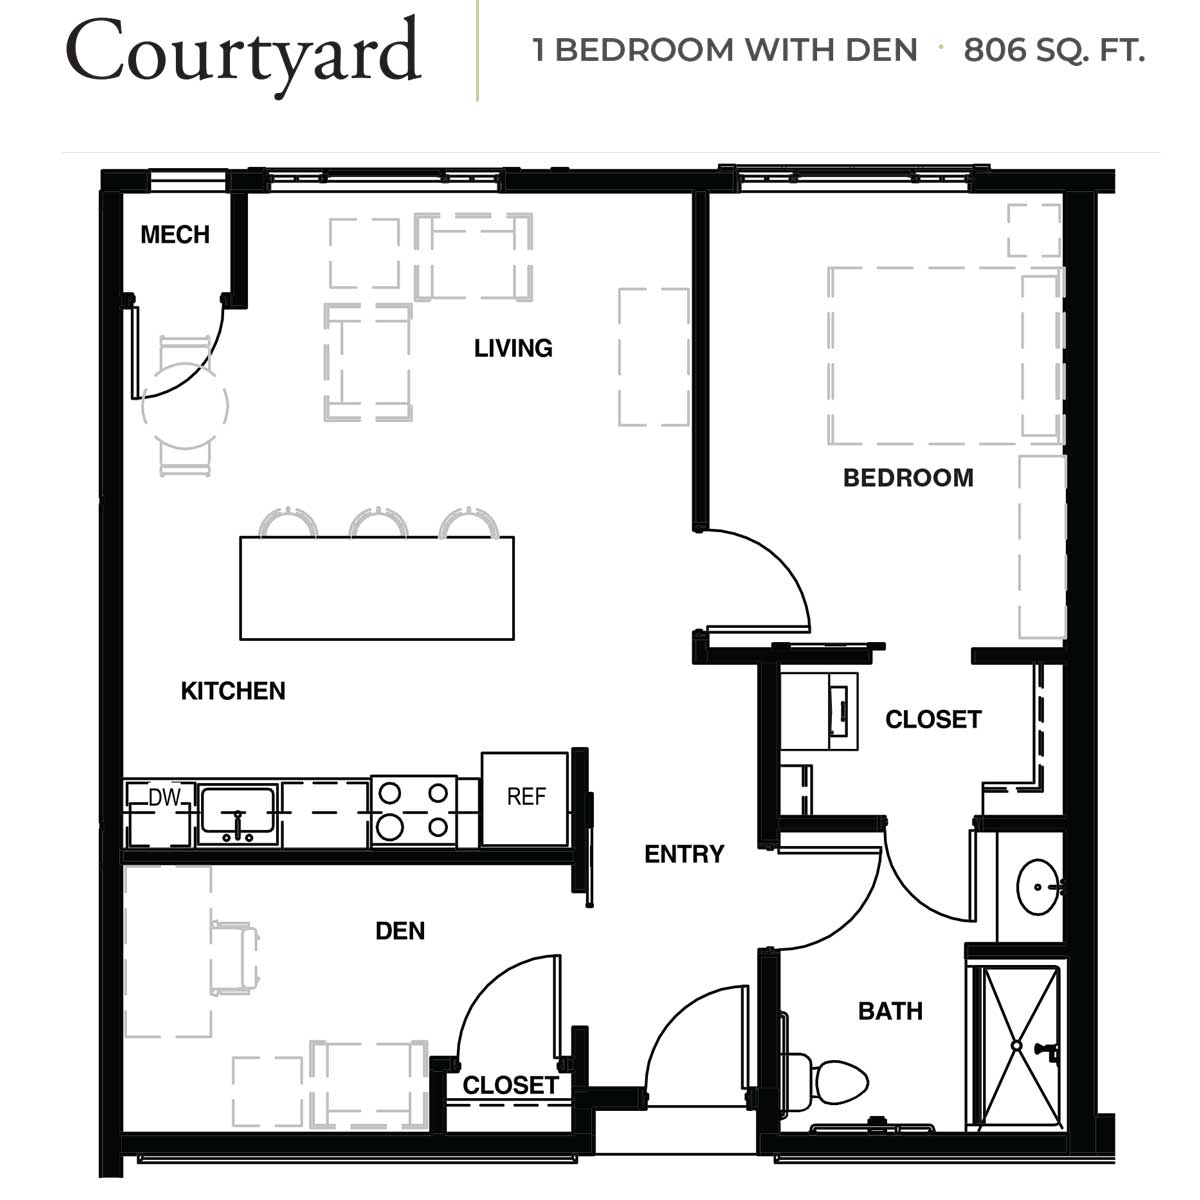 Diagram of a 1 bedroom with den, 806 sq. ft floor plan labeled Courtyard.